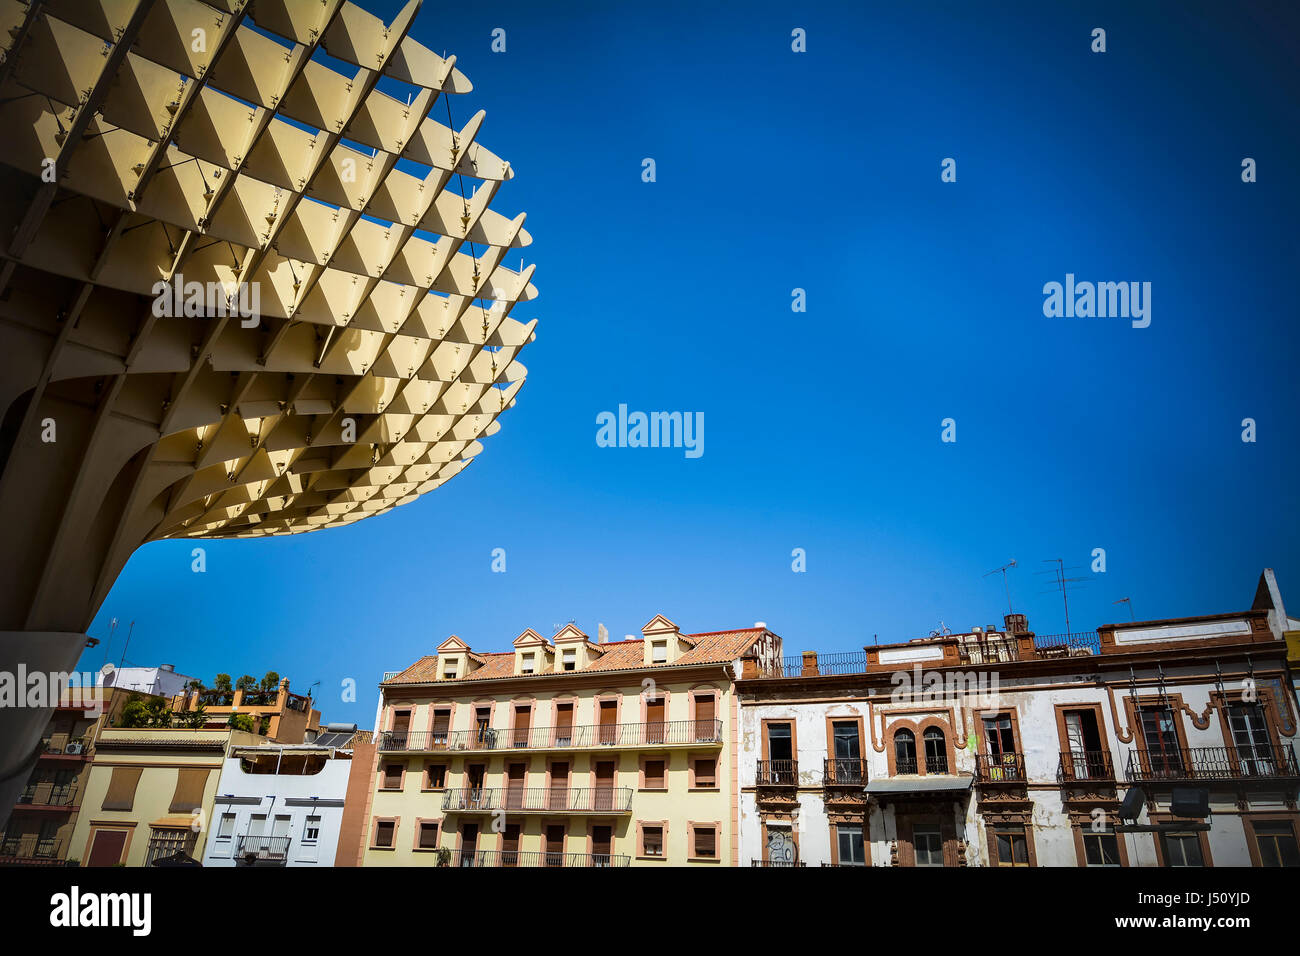 Wooden Metropol Parasol with Seville buildings and sky Stock Photo